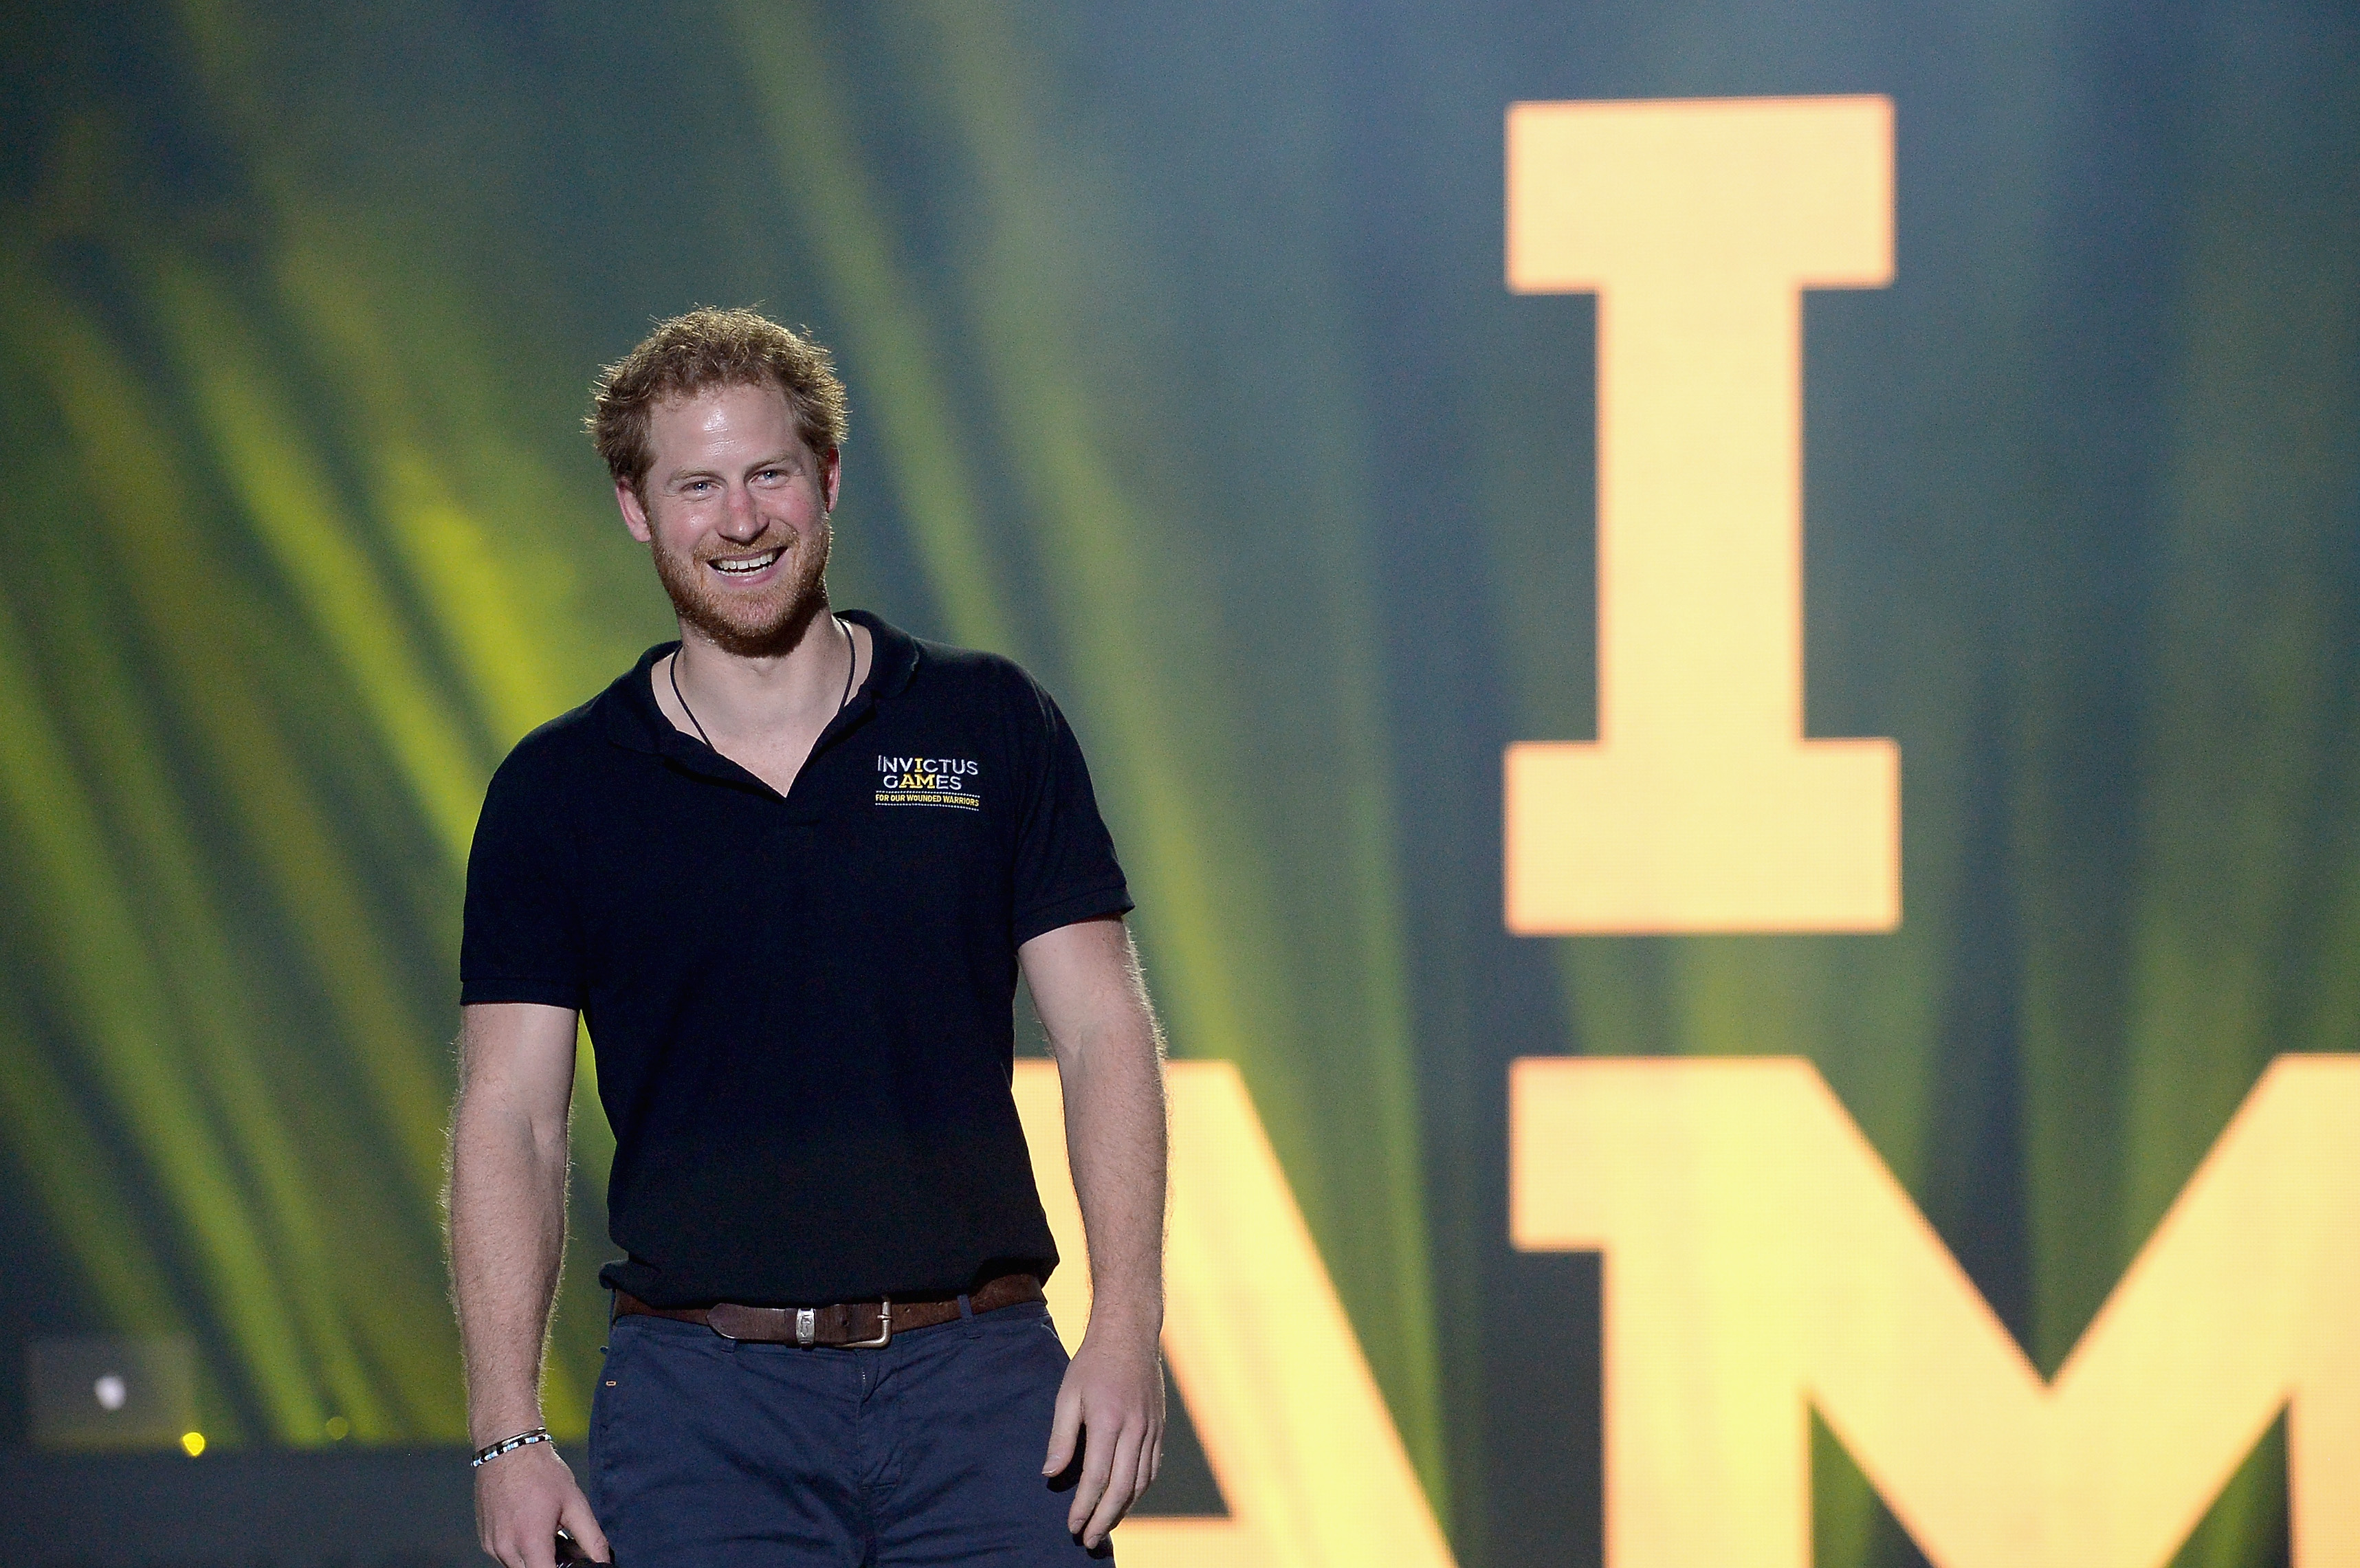 LAKE BUENA VISTA, FL - MAY 12: Prince Harry closing remarks during the Invictus Games Orlando 2016 - Closing Ceremony at ESPN Wide World of Sports Complex on May 12, 2016 in Lake Buena Vista, Florida. 